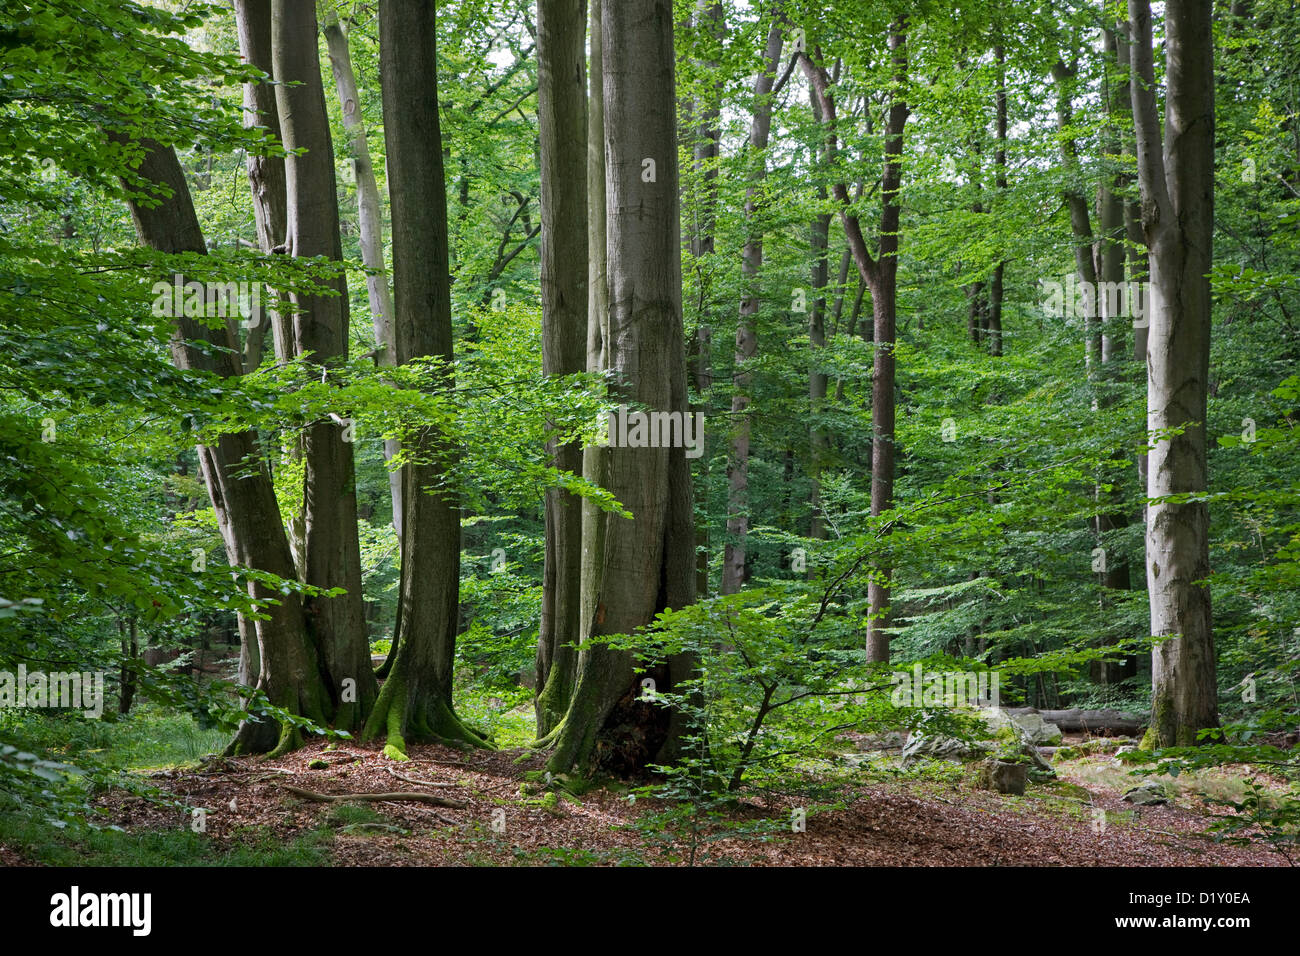 Common beech tree trunks (Fagus sylvatica) in broad-leaved forest in summer Stock Photo